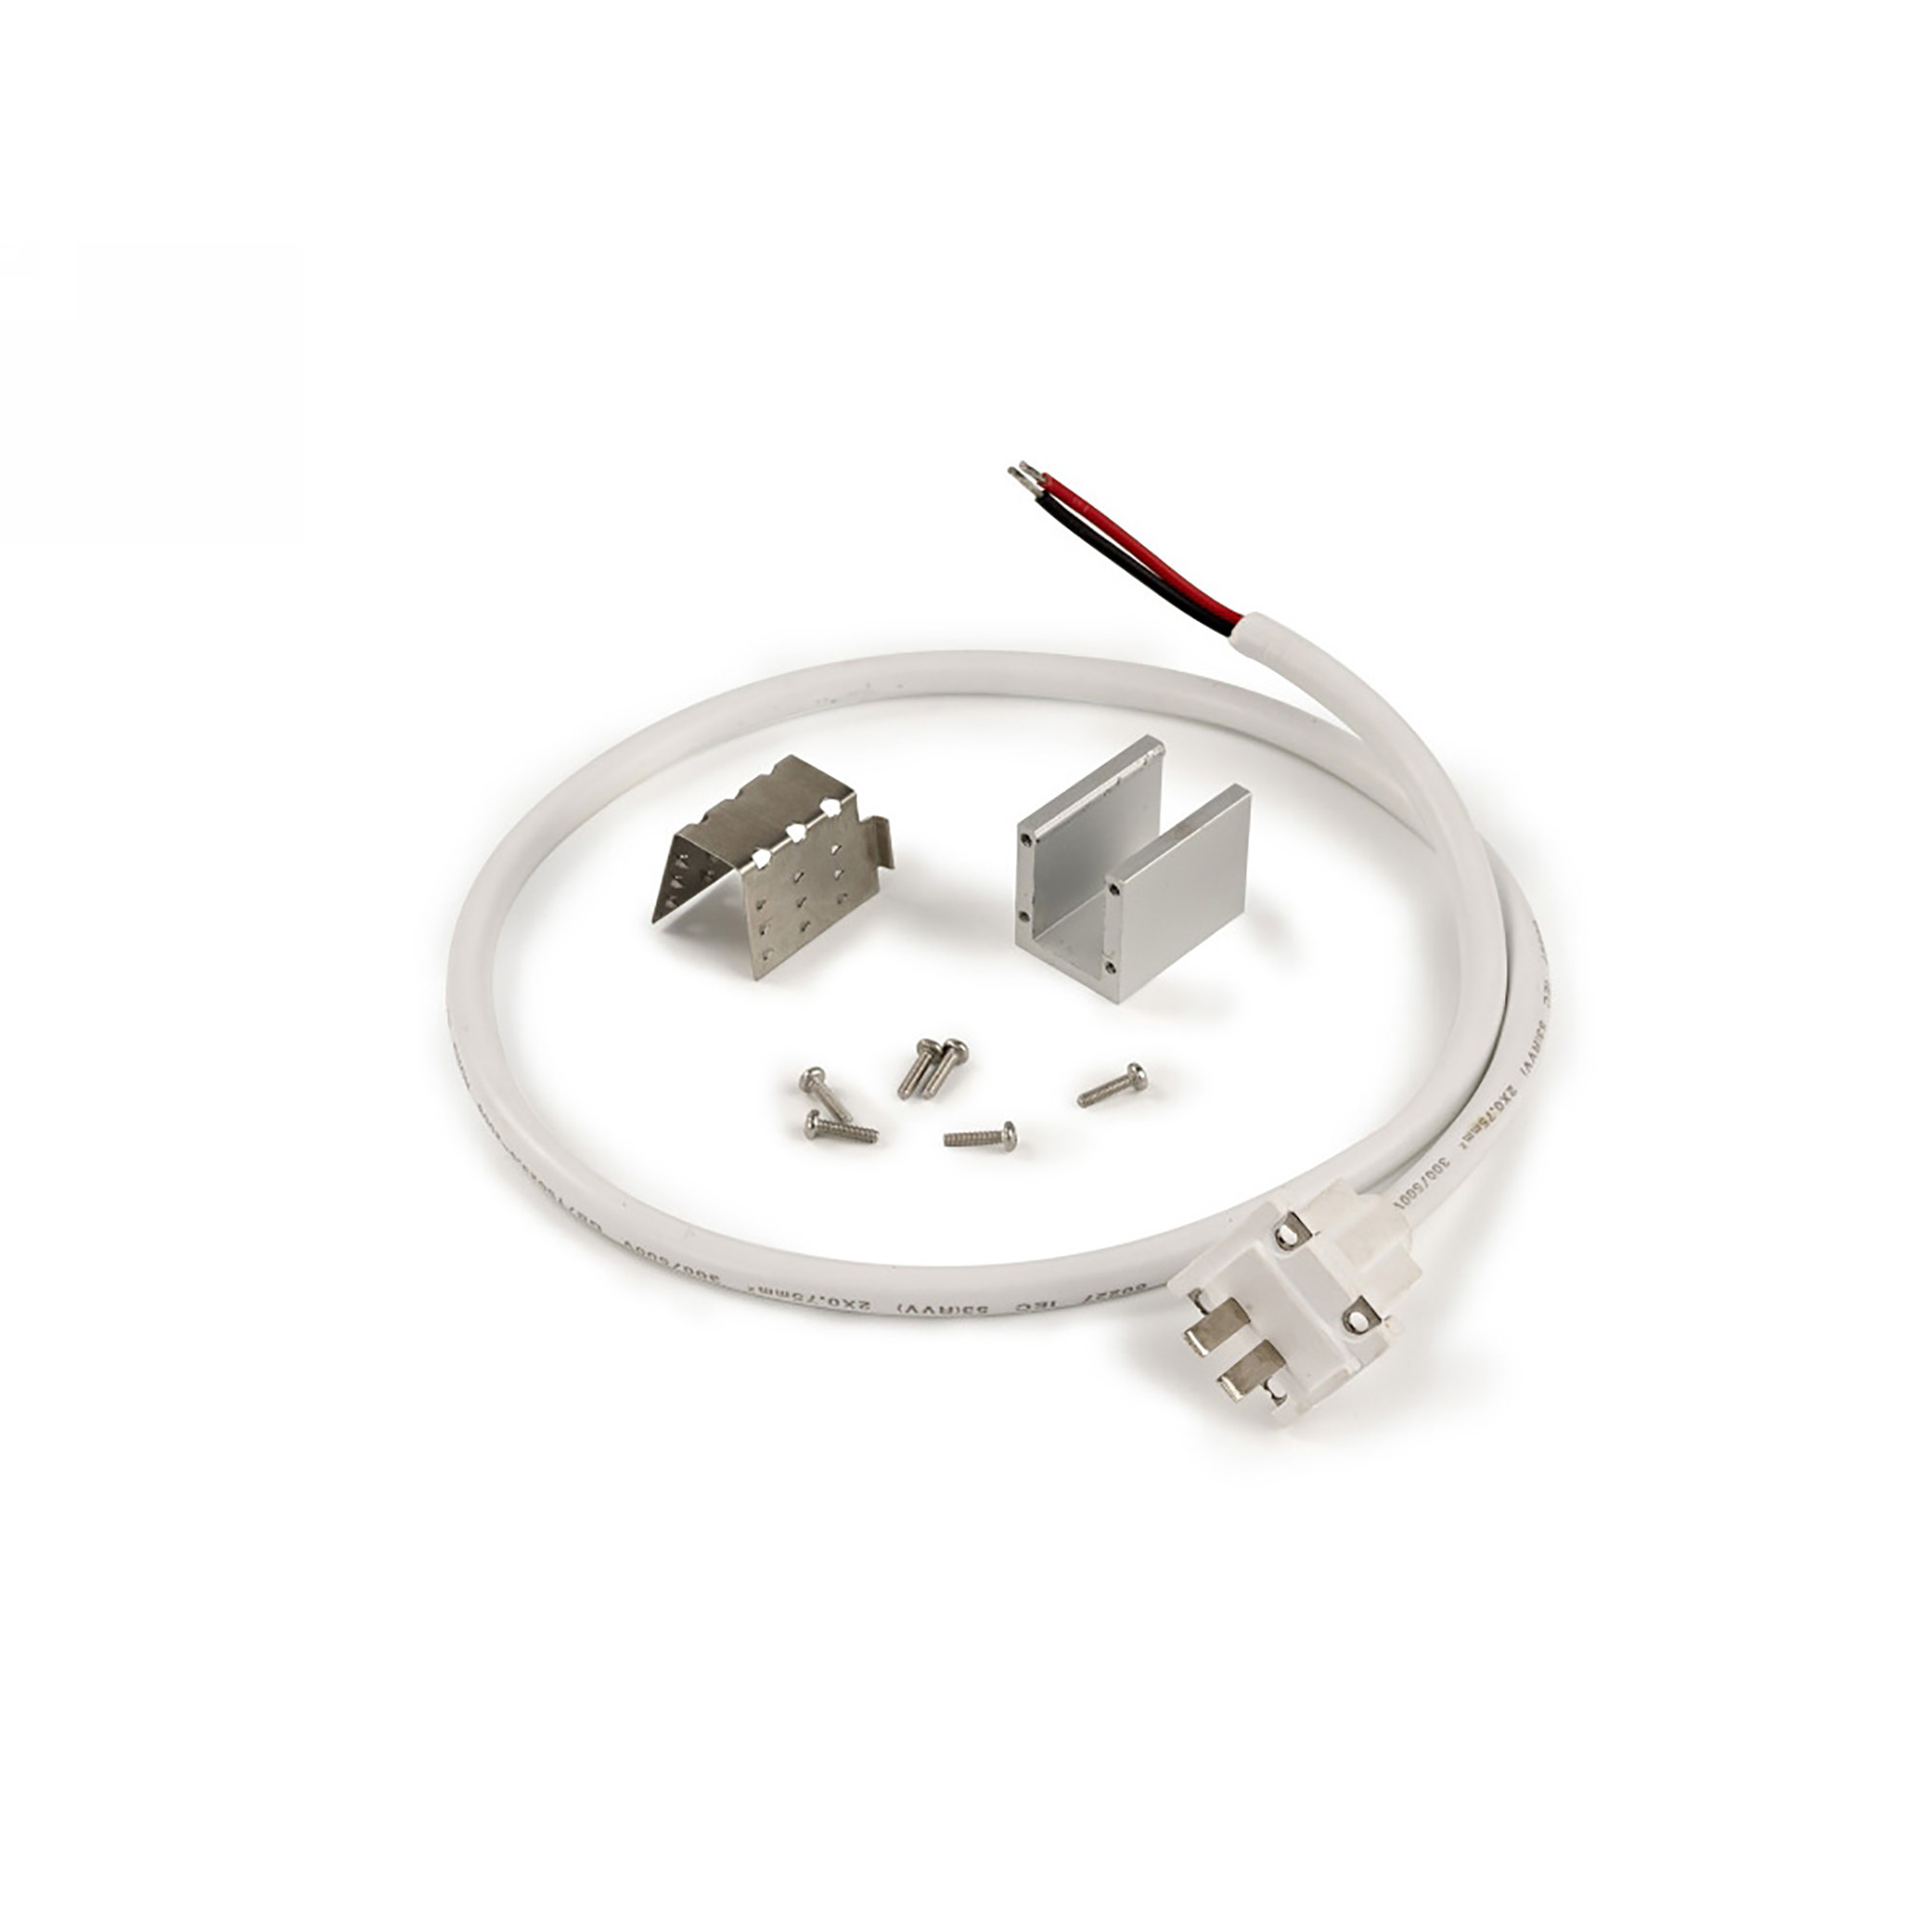 DX770043  Nexi 60 SF/SR; Front Left Side Connection Kit 0.6m Cable IP67/68